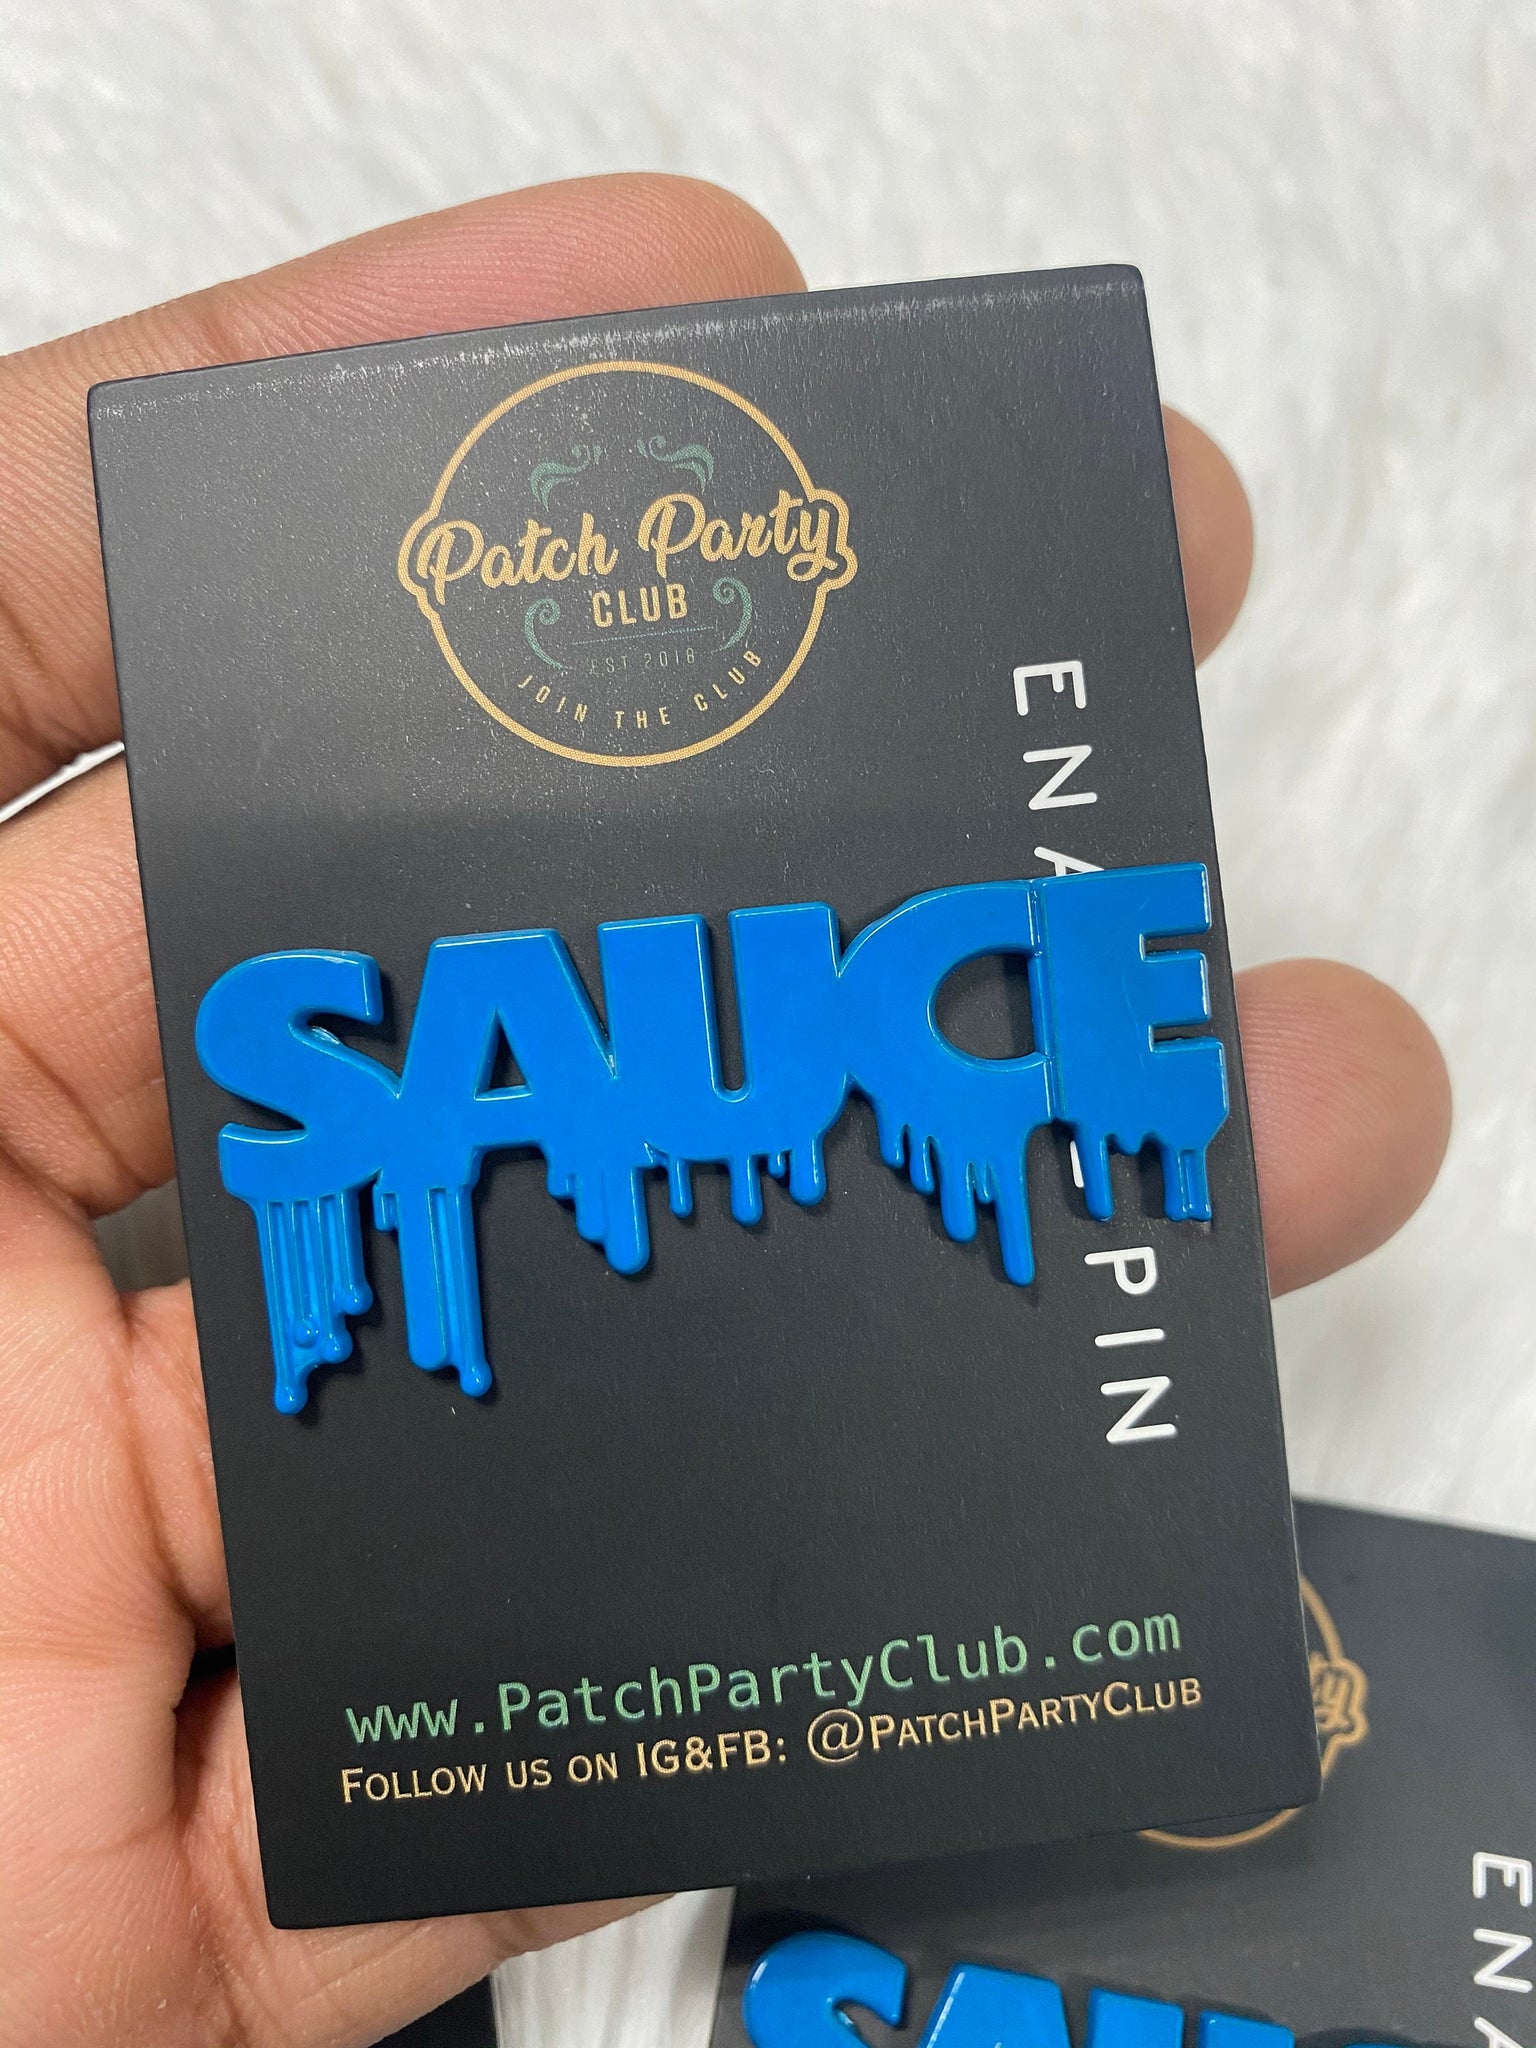 New, Enamel Pin "SAUCE" Exclusive Lapel Pin, Popular Enamel Pins, Size 1.77 inches, w/Butterfly Clutch, Cool Pin For Apparel